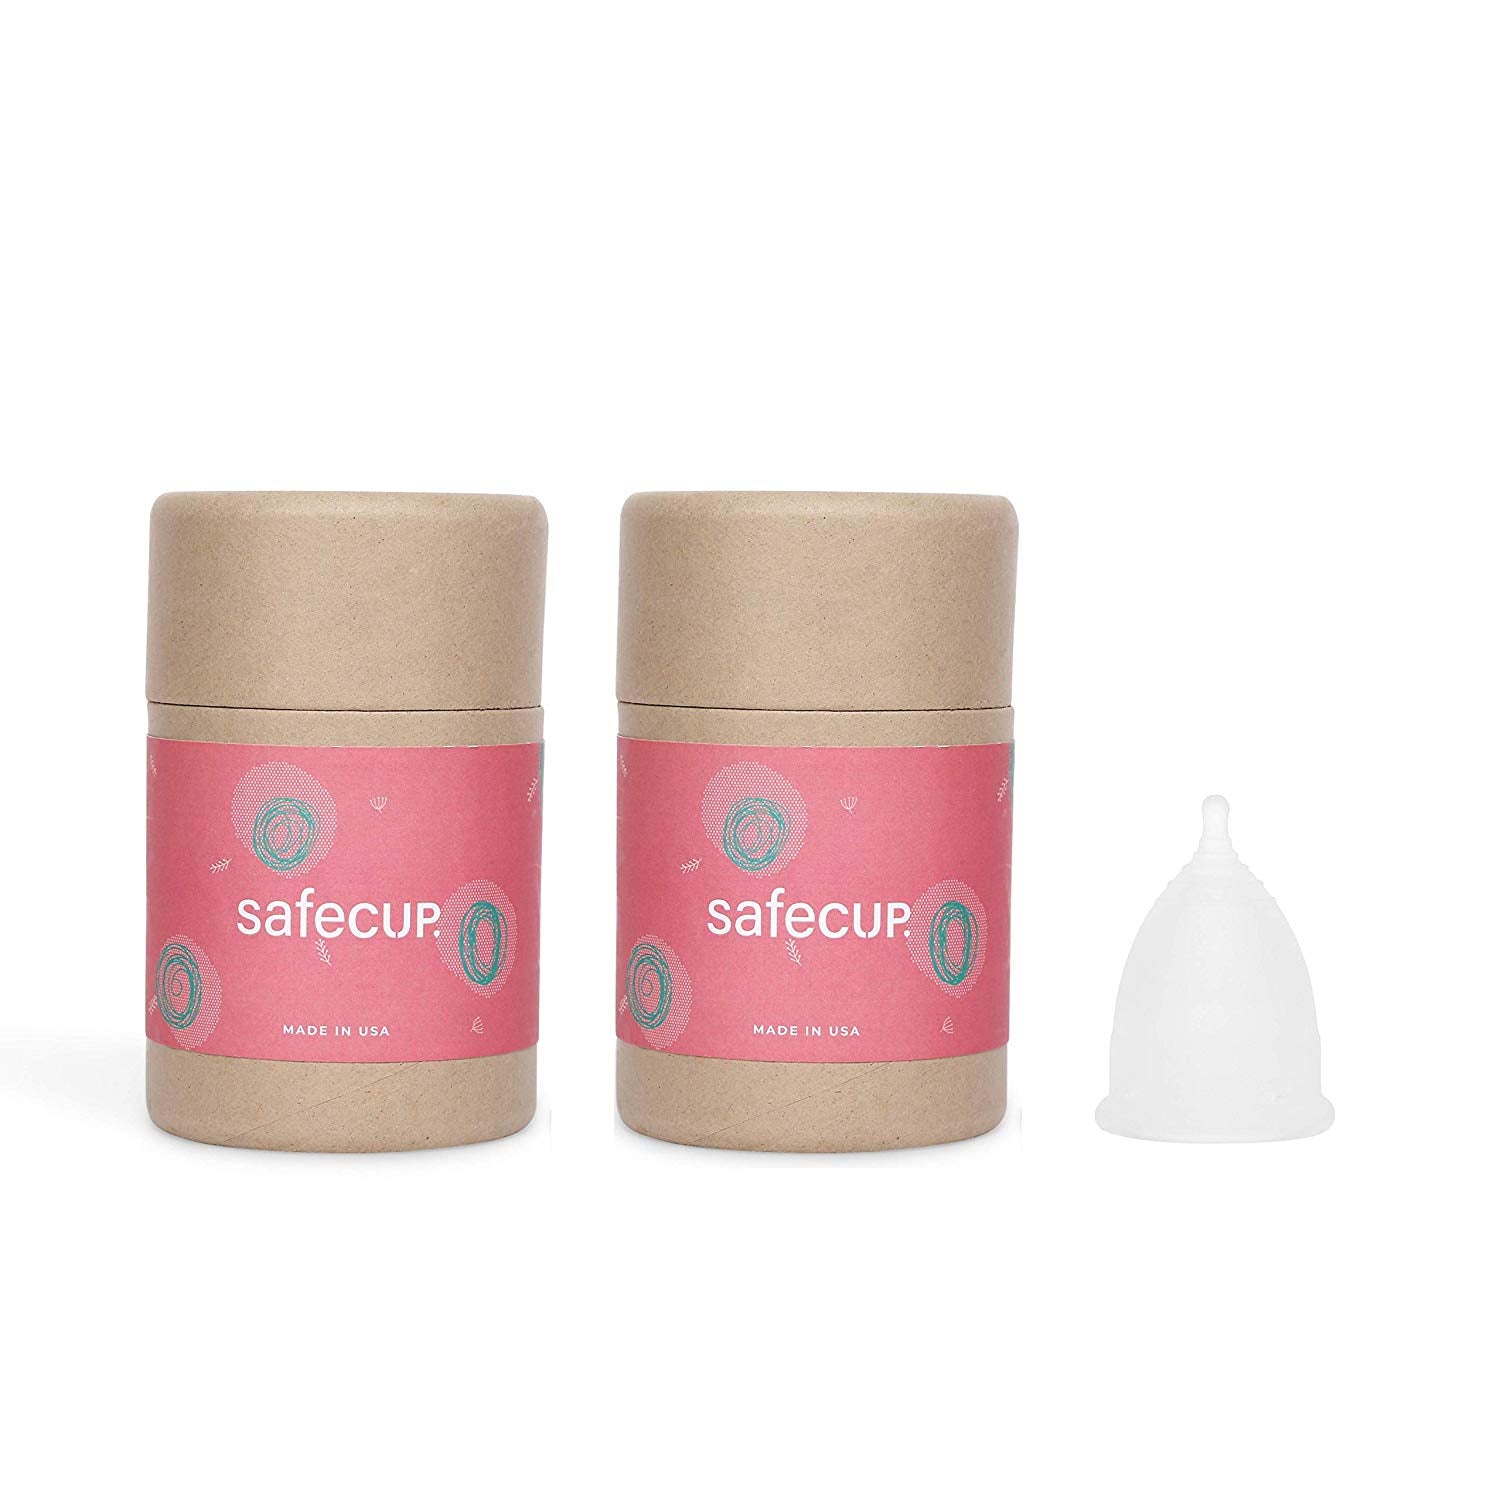 Safecup Menstrual cups (Pack of 2) Made in USA